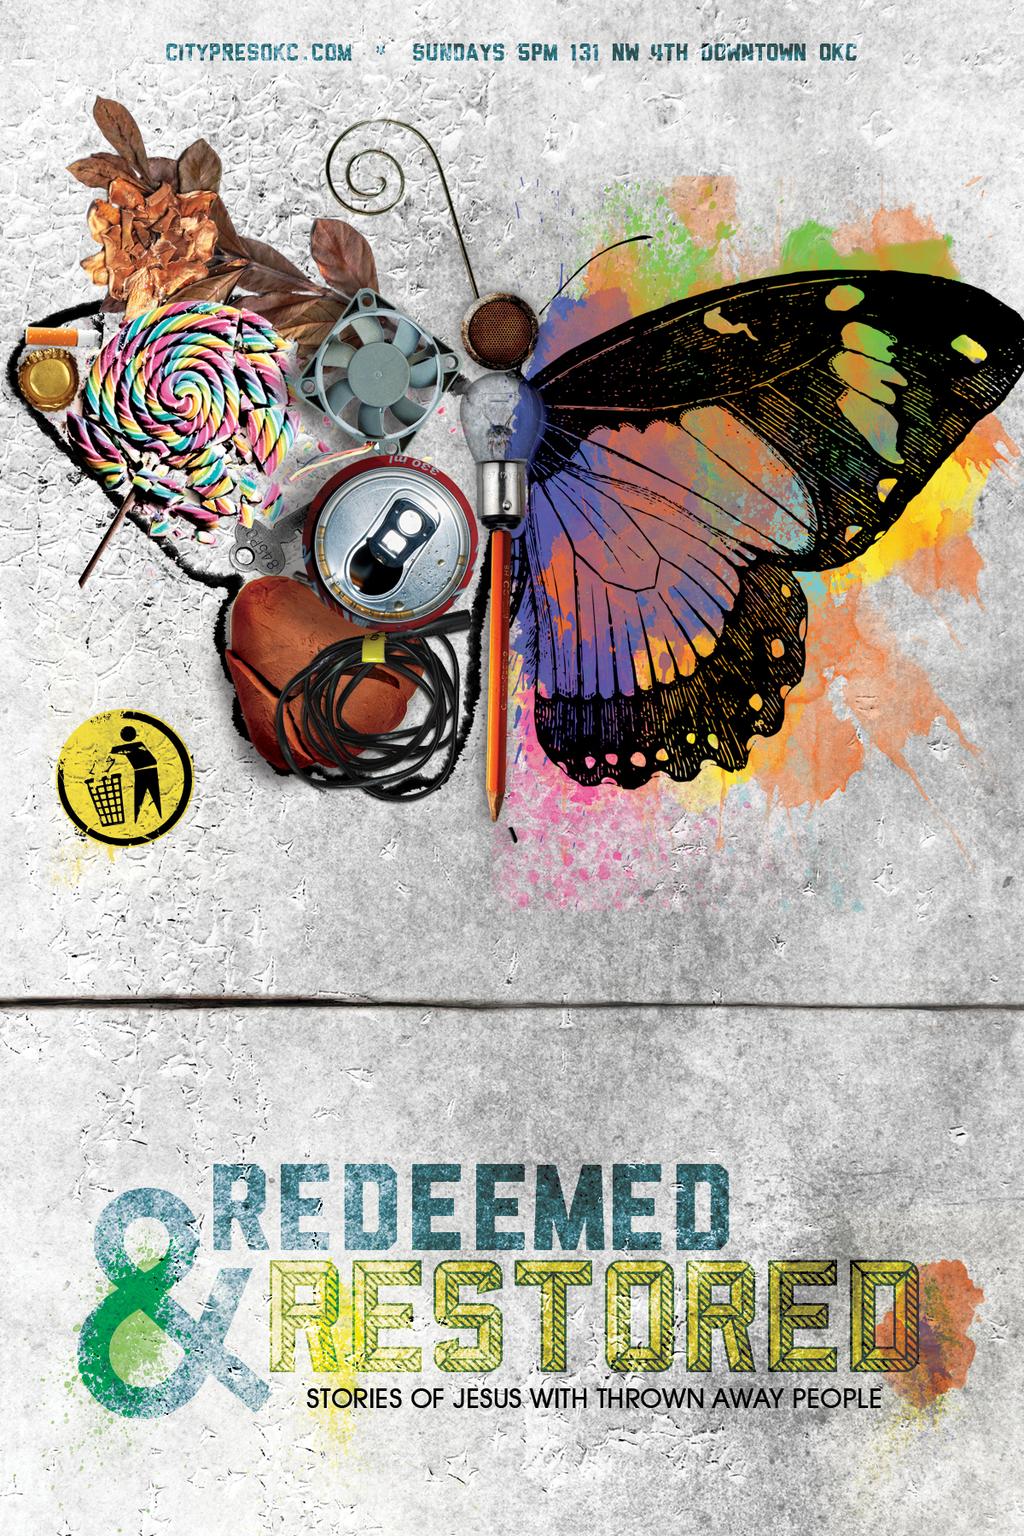 Redeemed and Restored Stories of Jesus with Thrown Away People